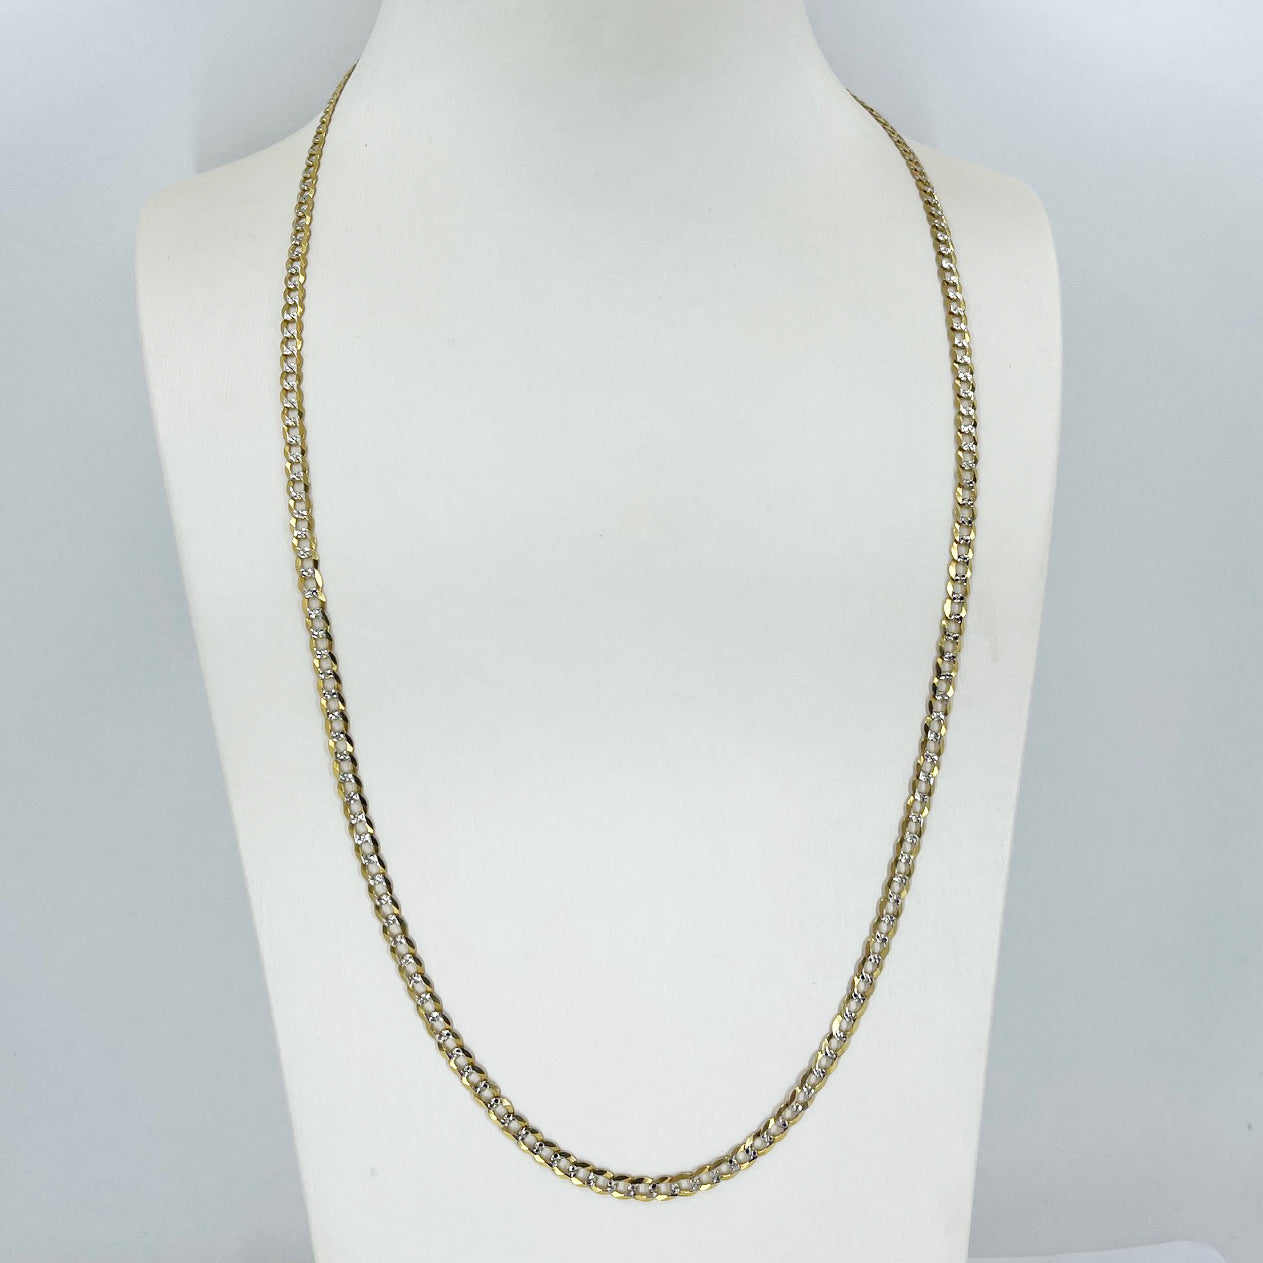 14K Solid Yellow Gold Stone Cut Cuban Link Chain 24" 9.8 Grams